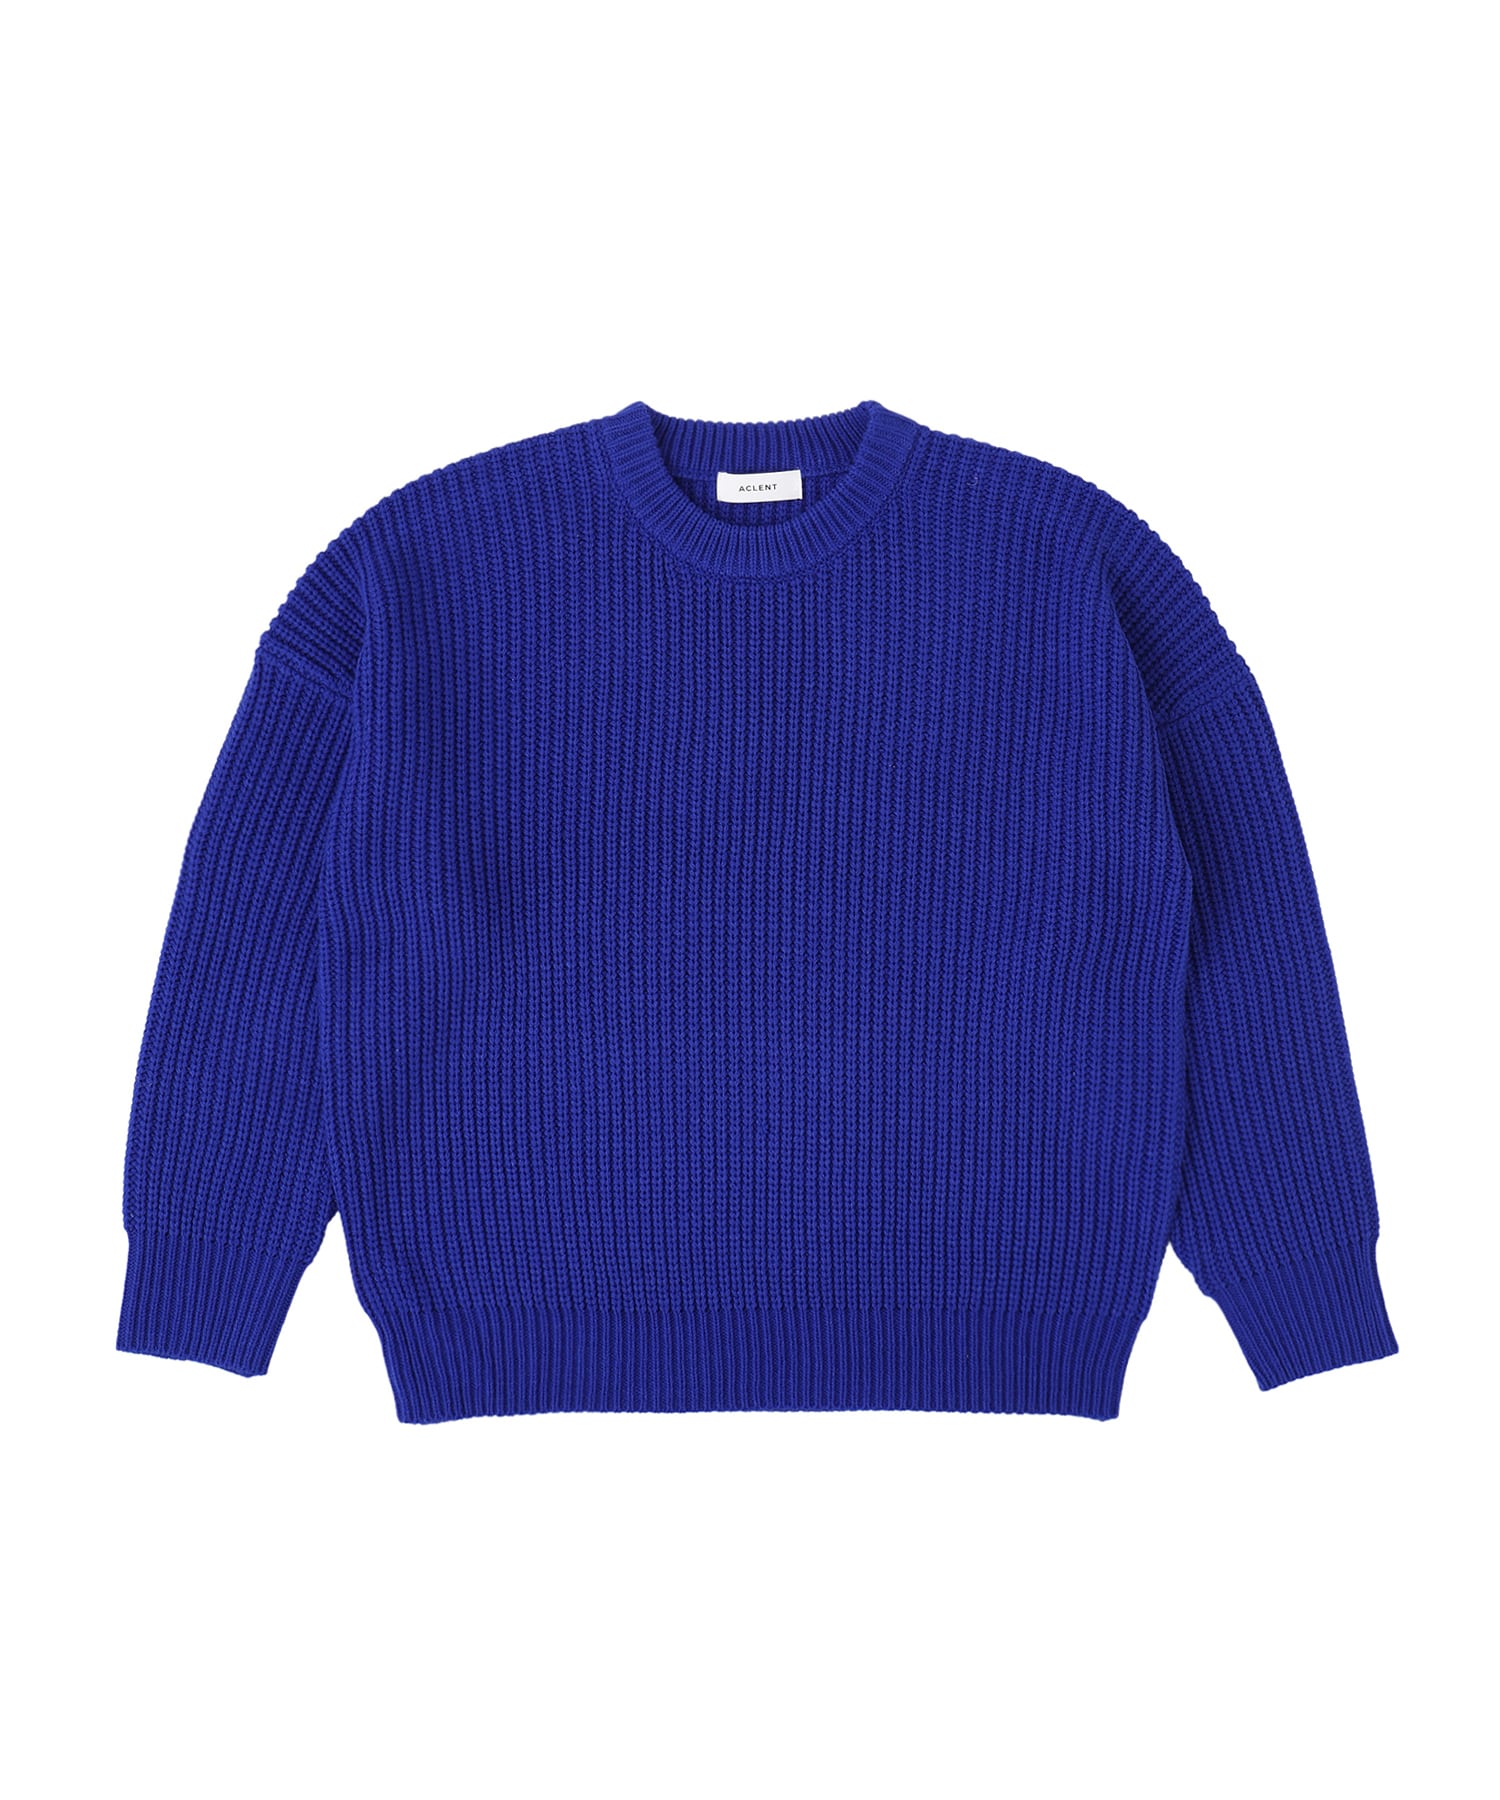 Daily color loose knit